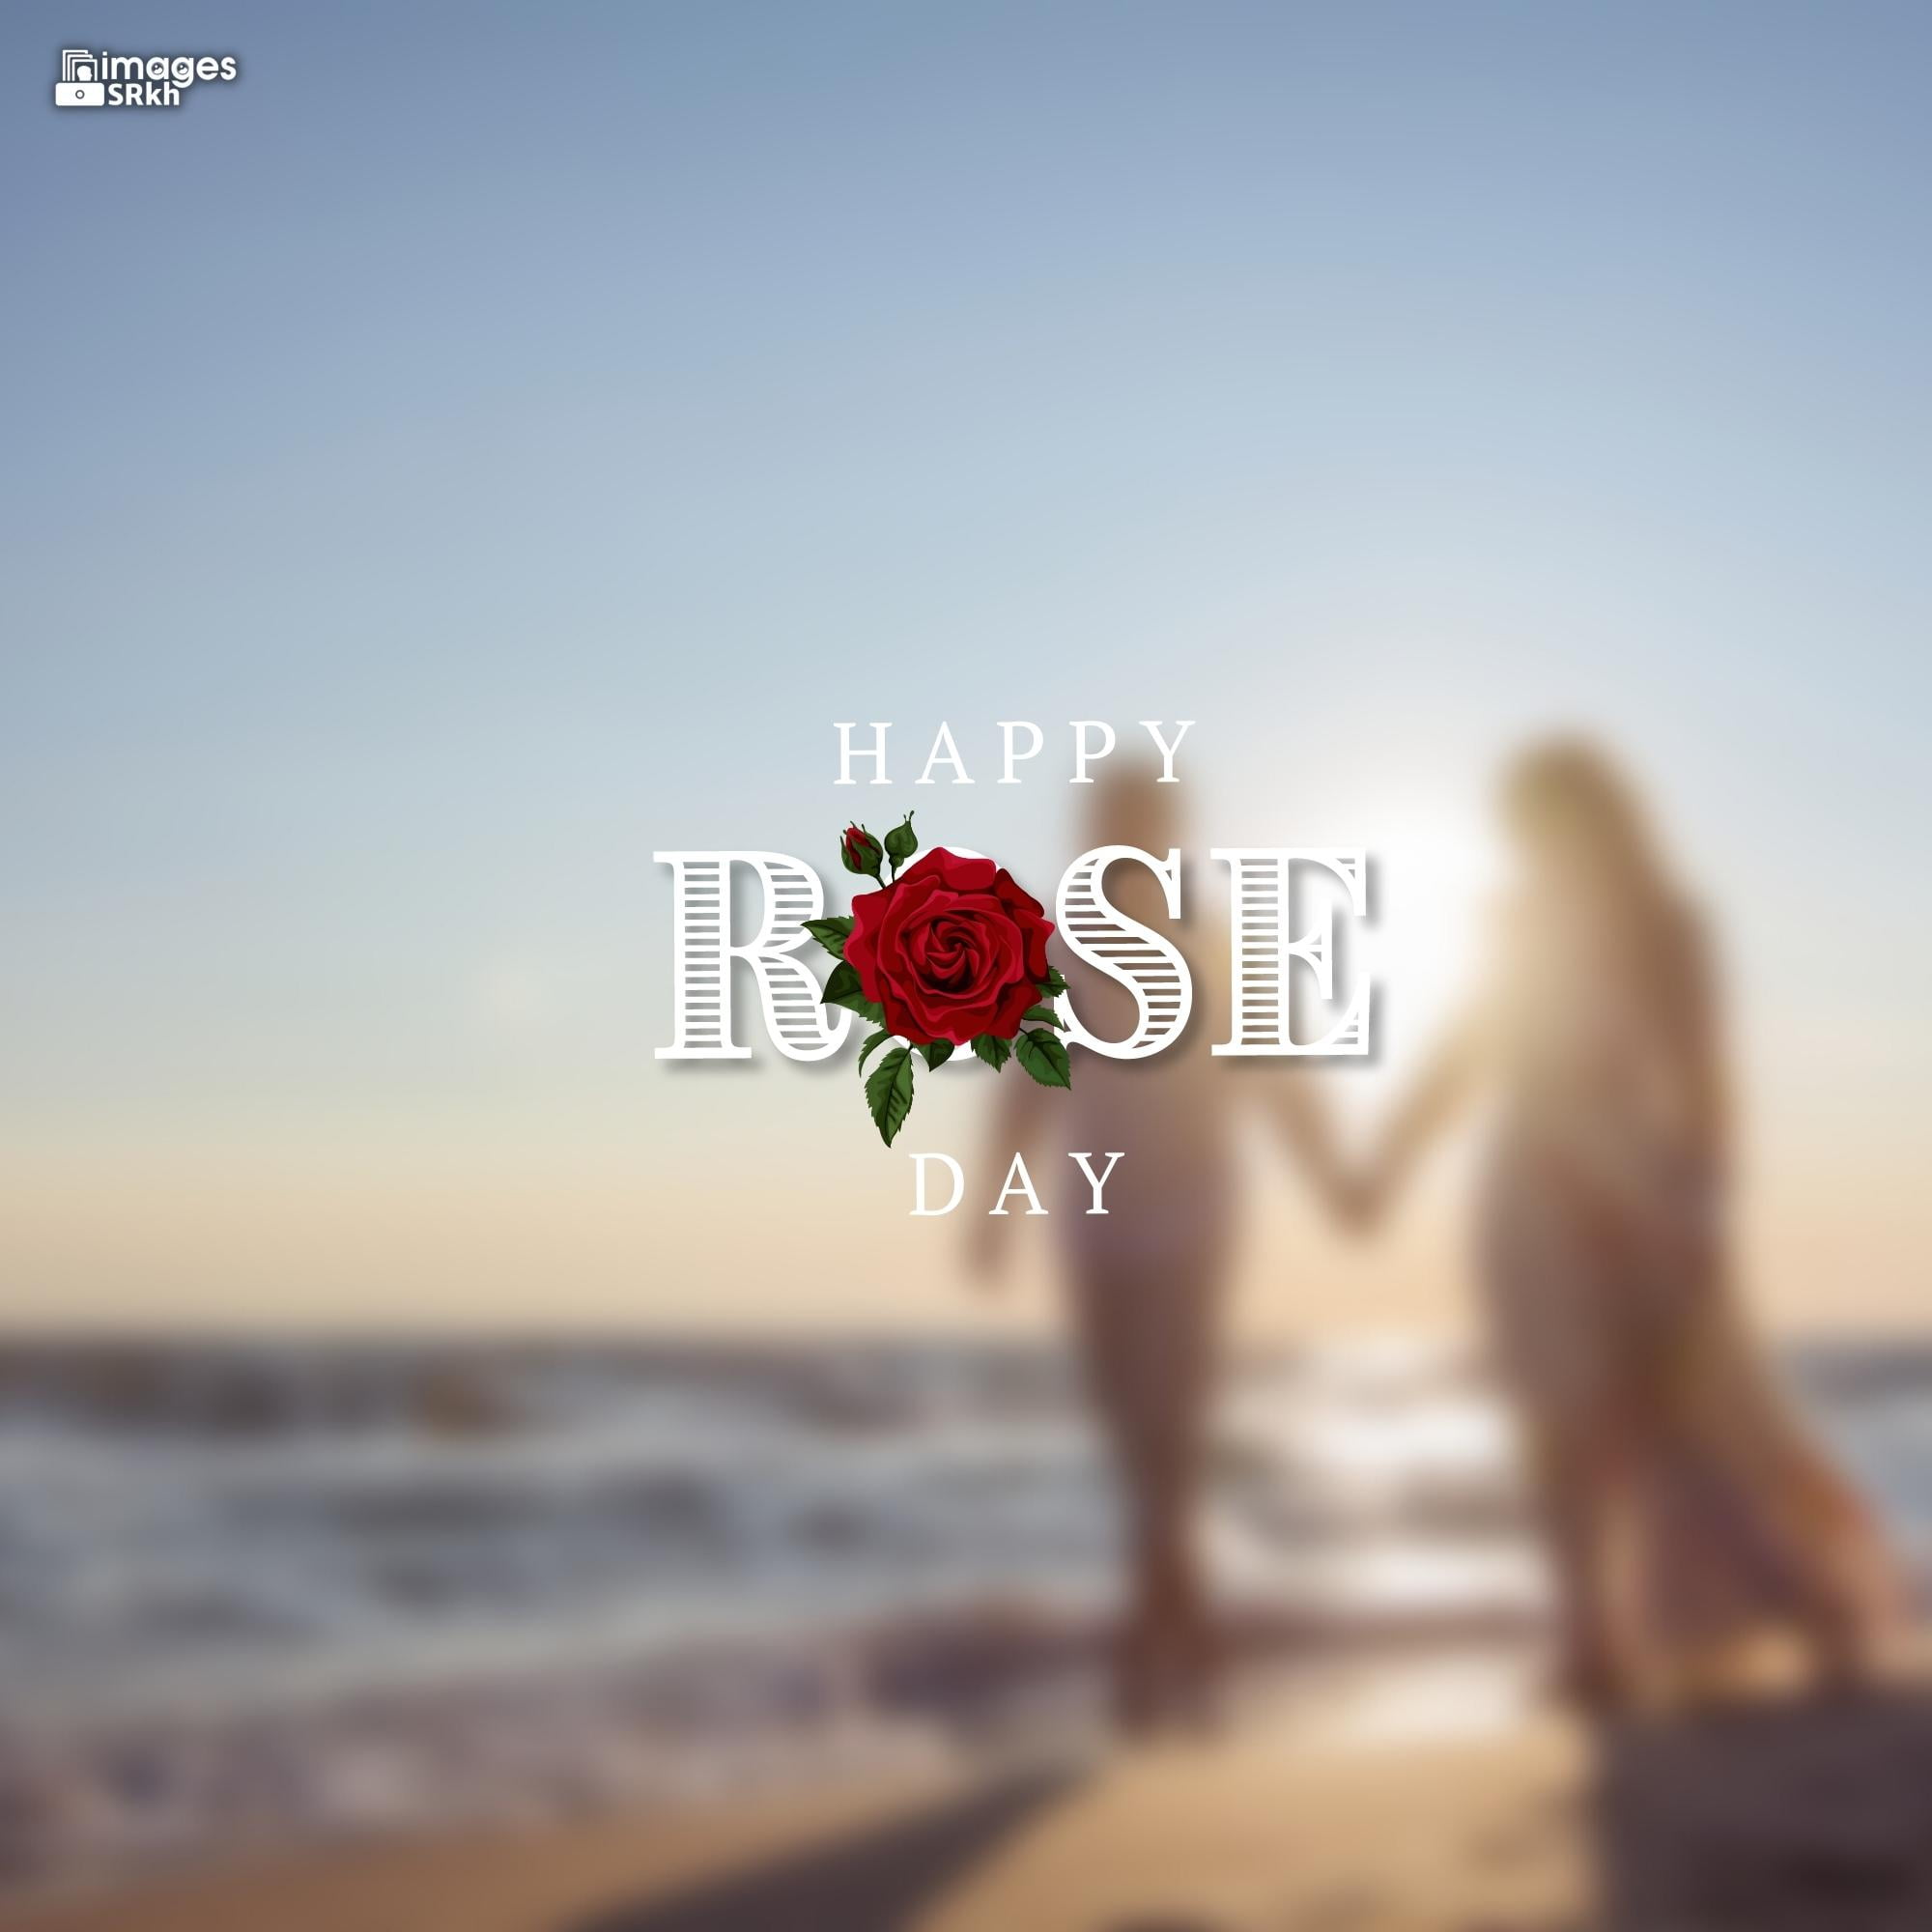 Romantic Rose Day Images Hd Download (6)